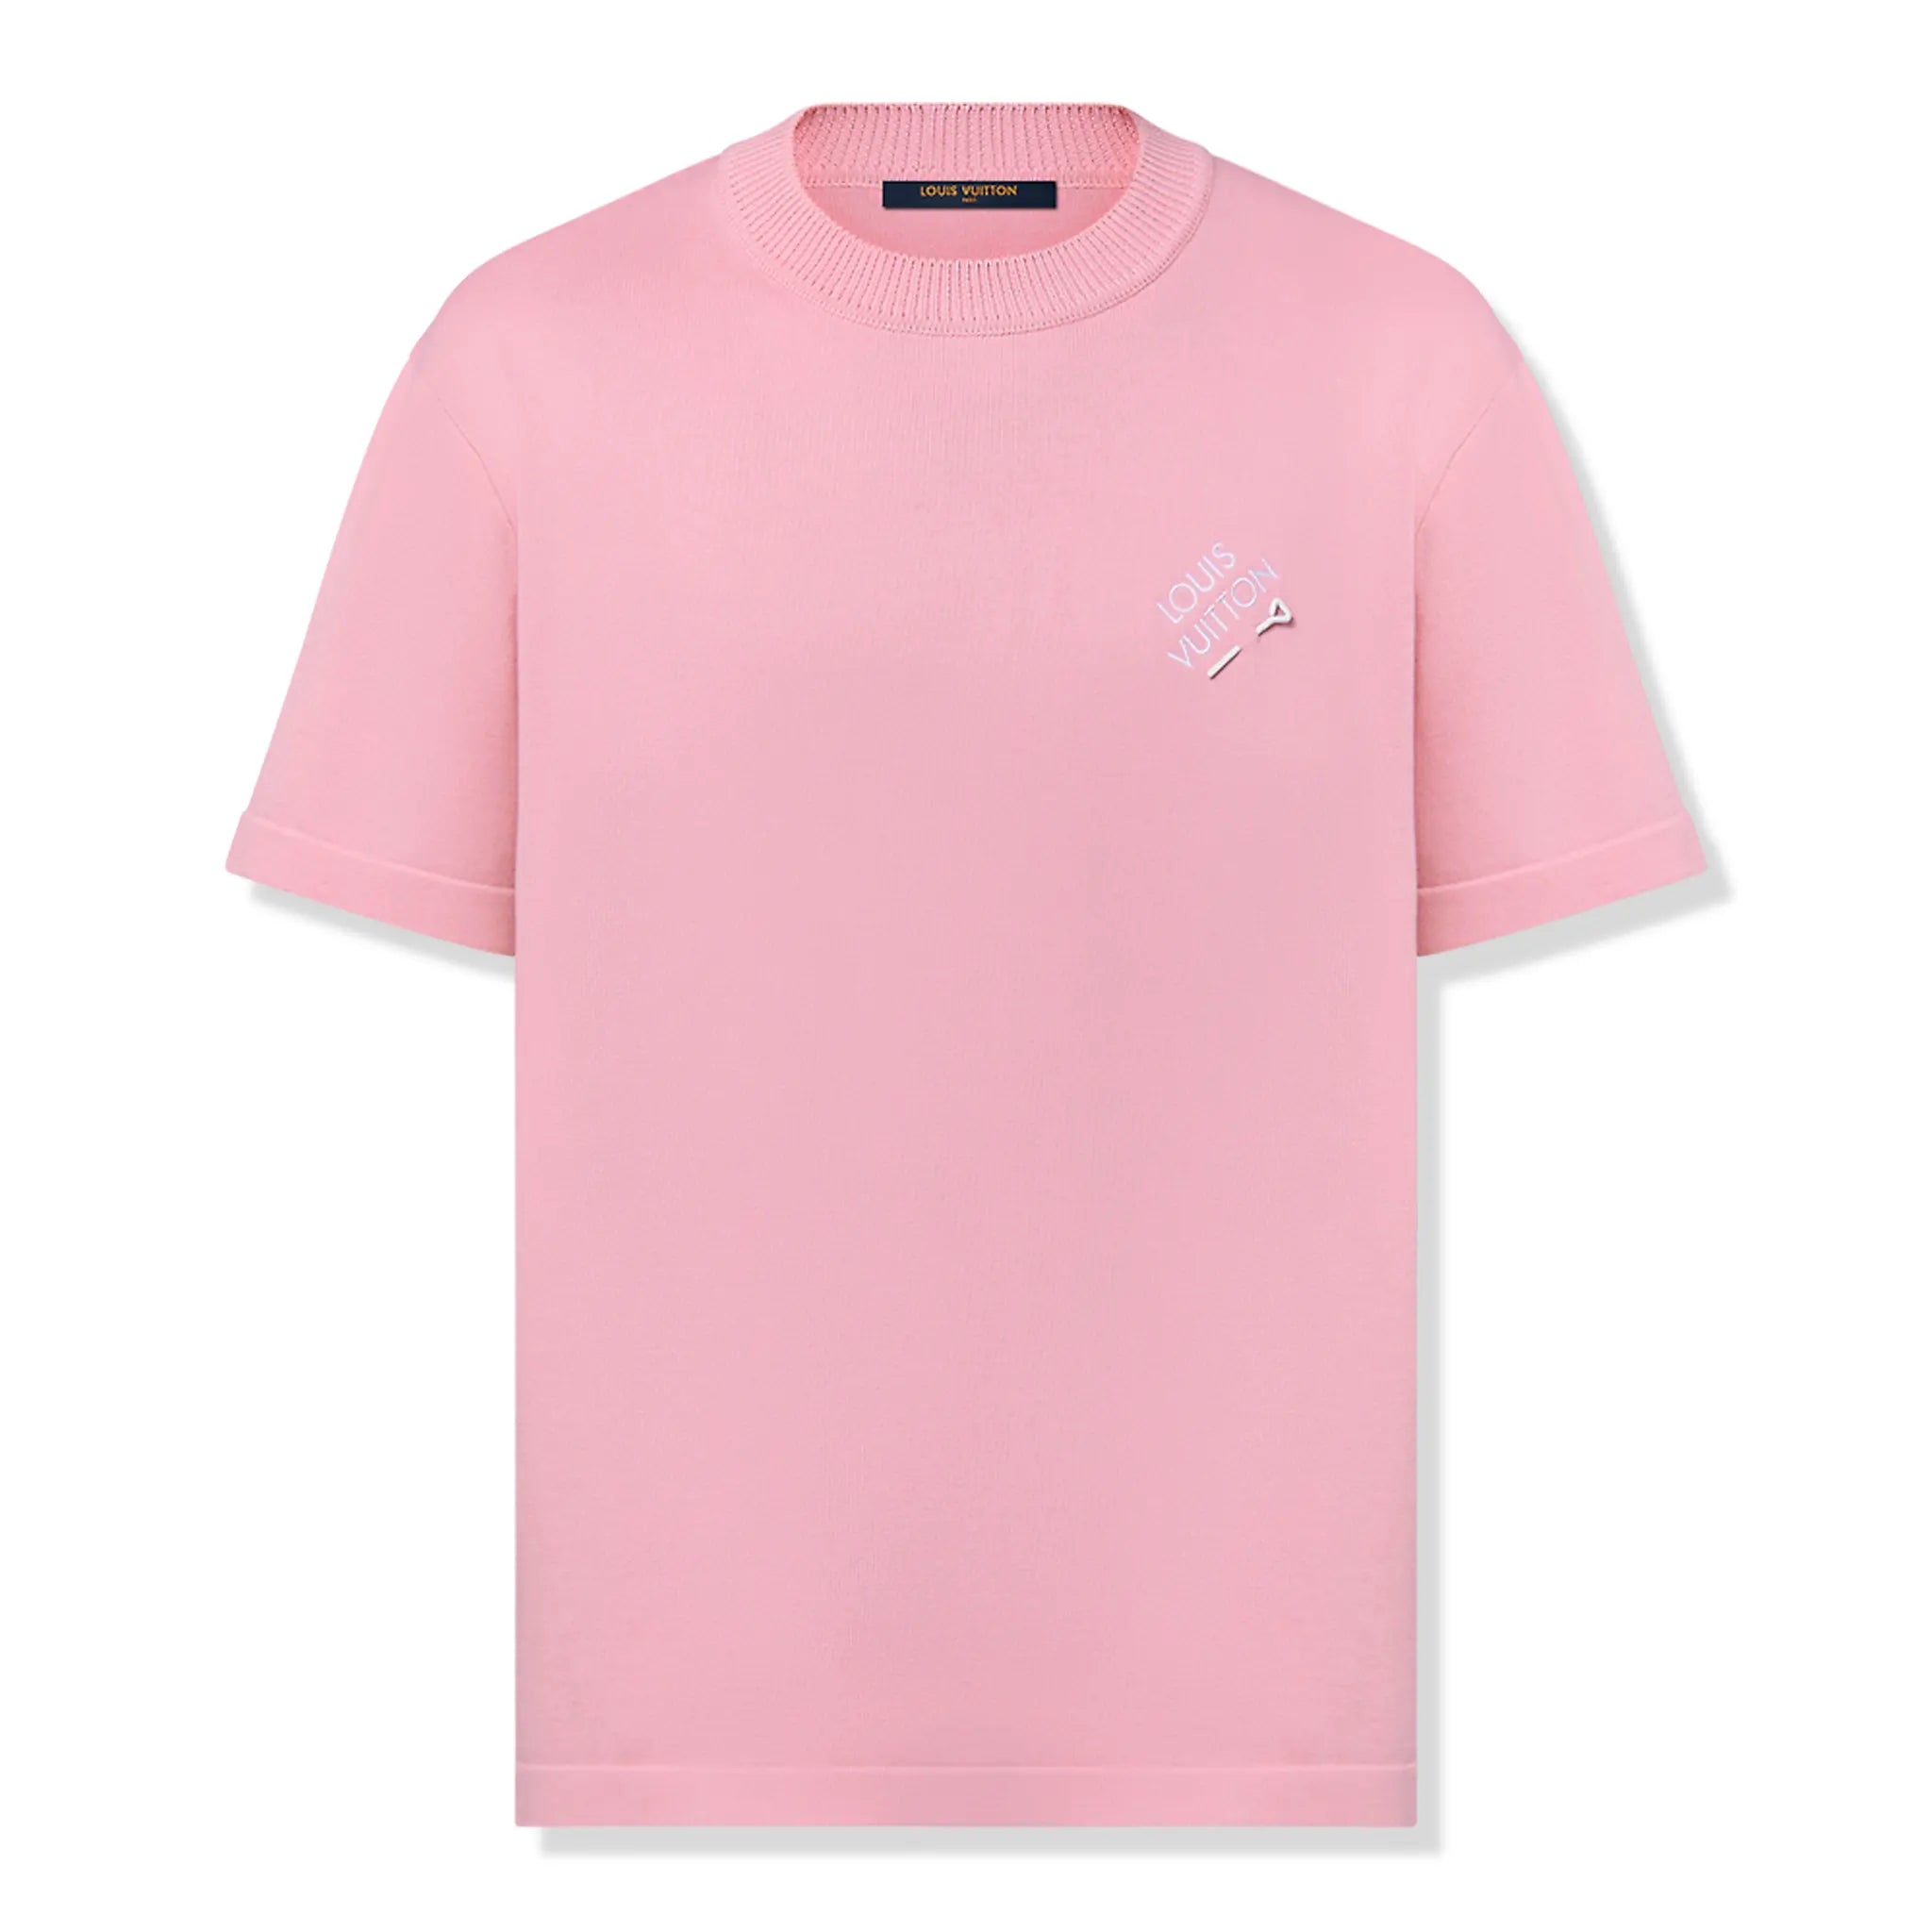 Front view of Louis Vuitton Embroidered Signature Crewneck Coral Blush Pink T Shirt